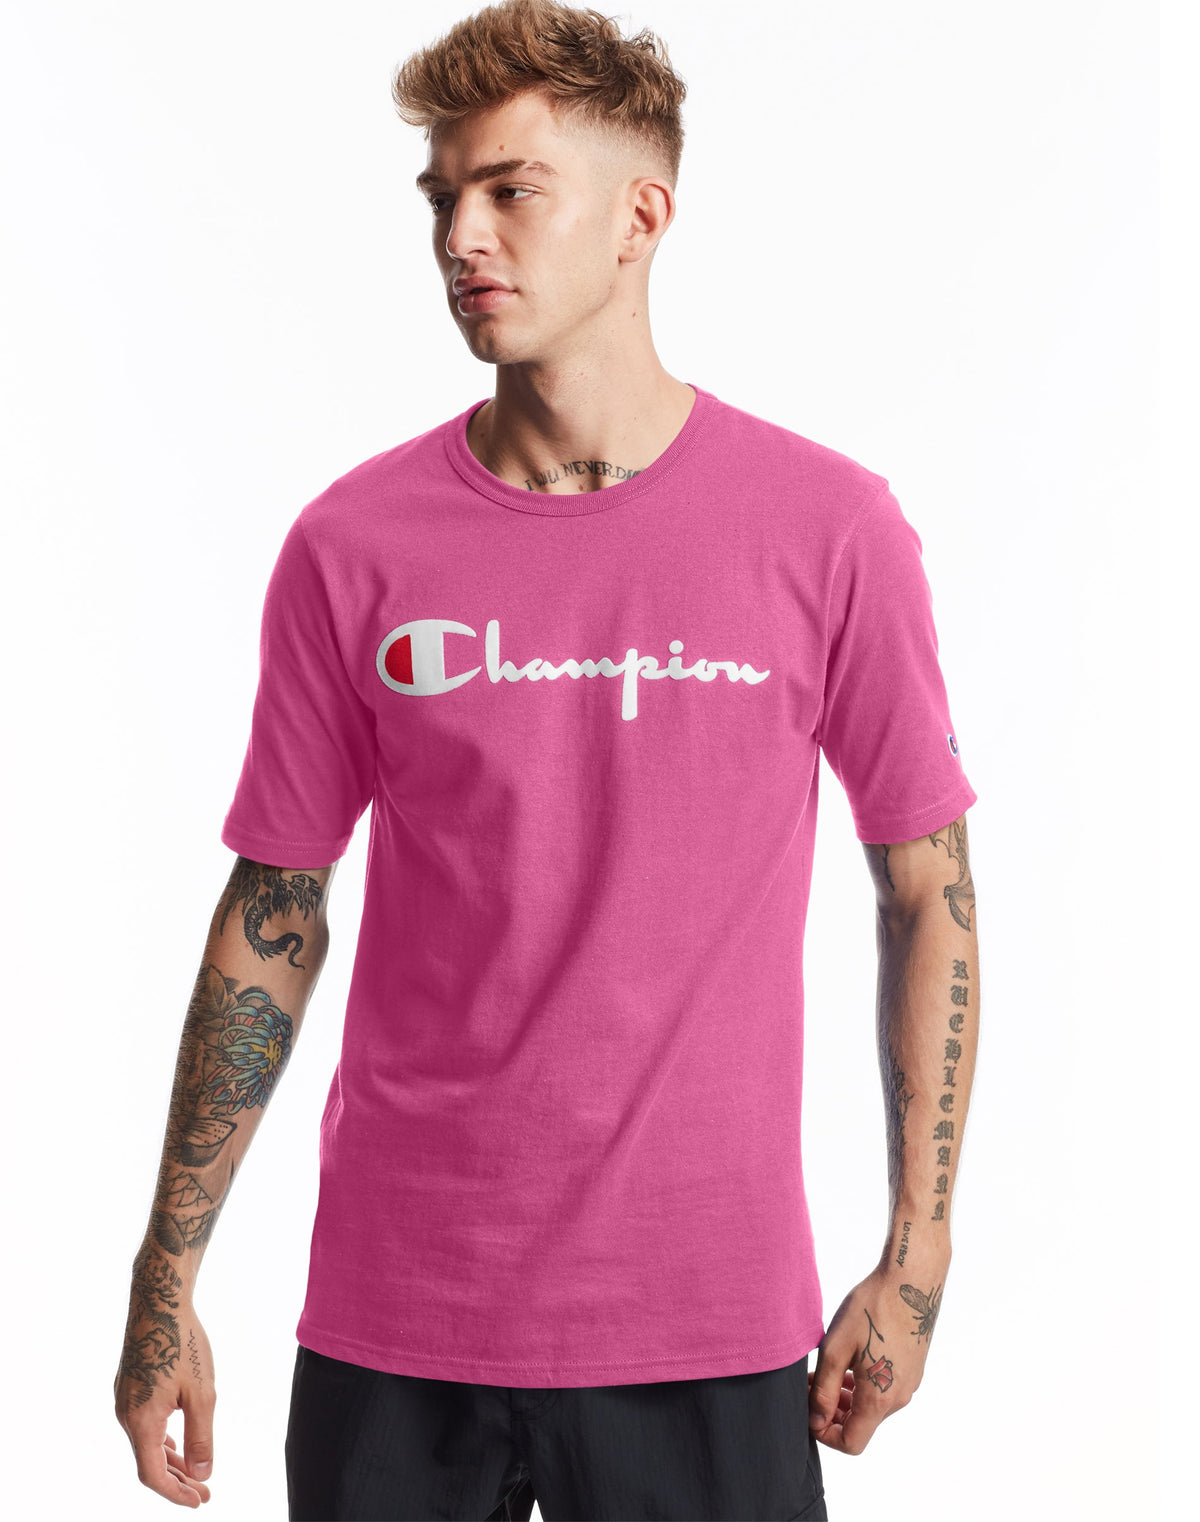 Champion-Heritage Short Sleeve-Parade Pink-GT19Y08252